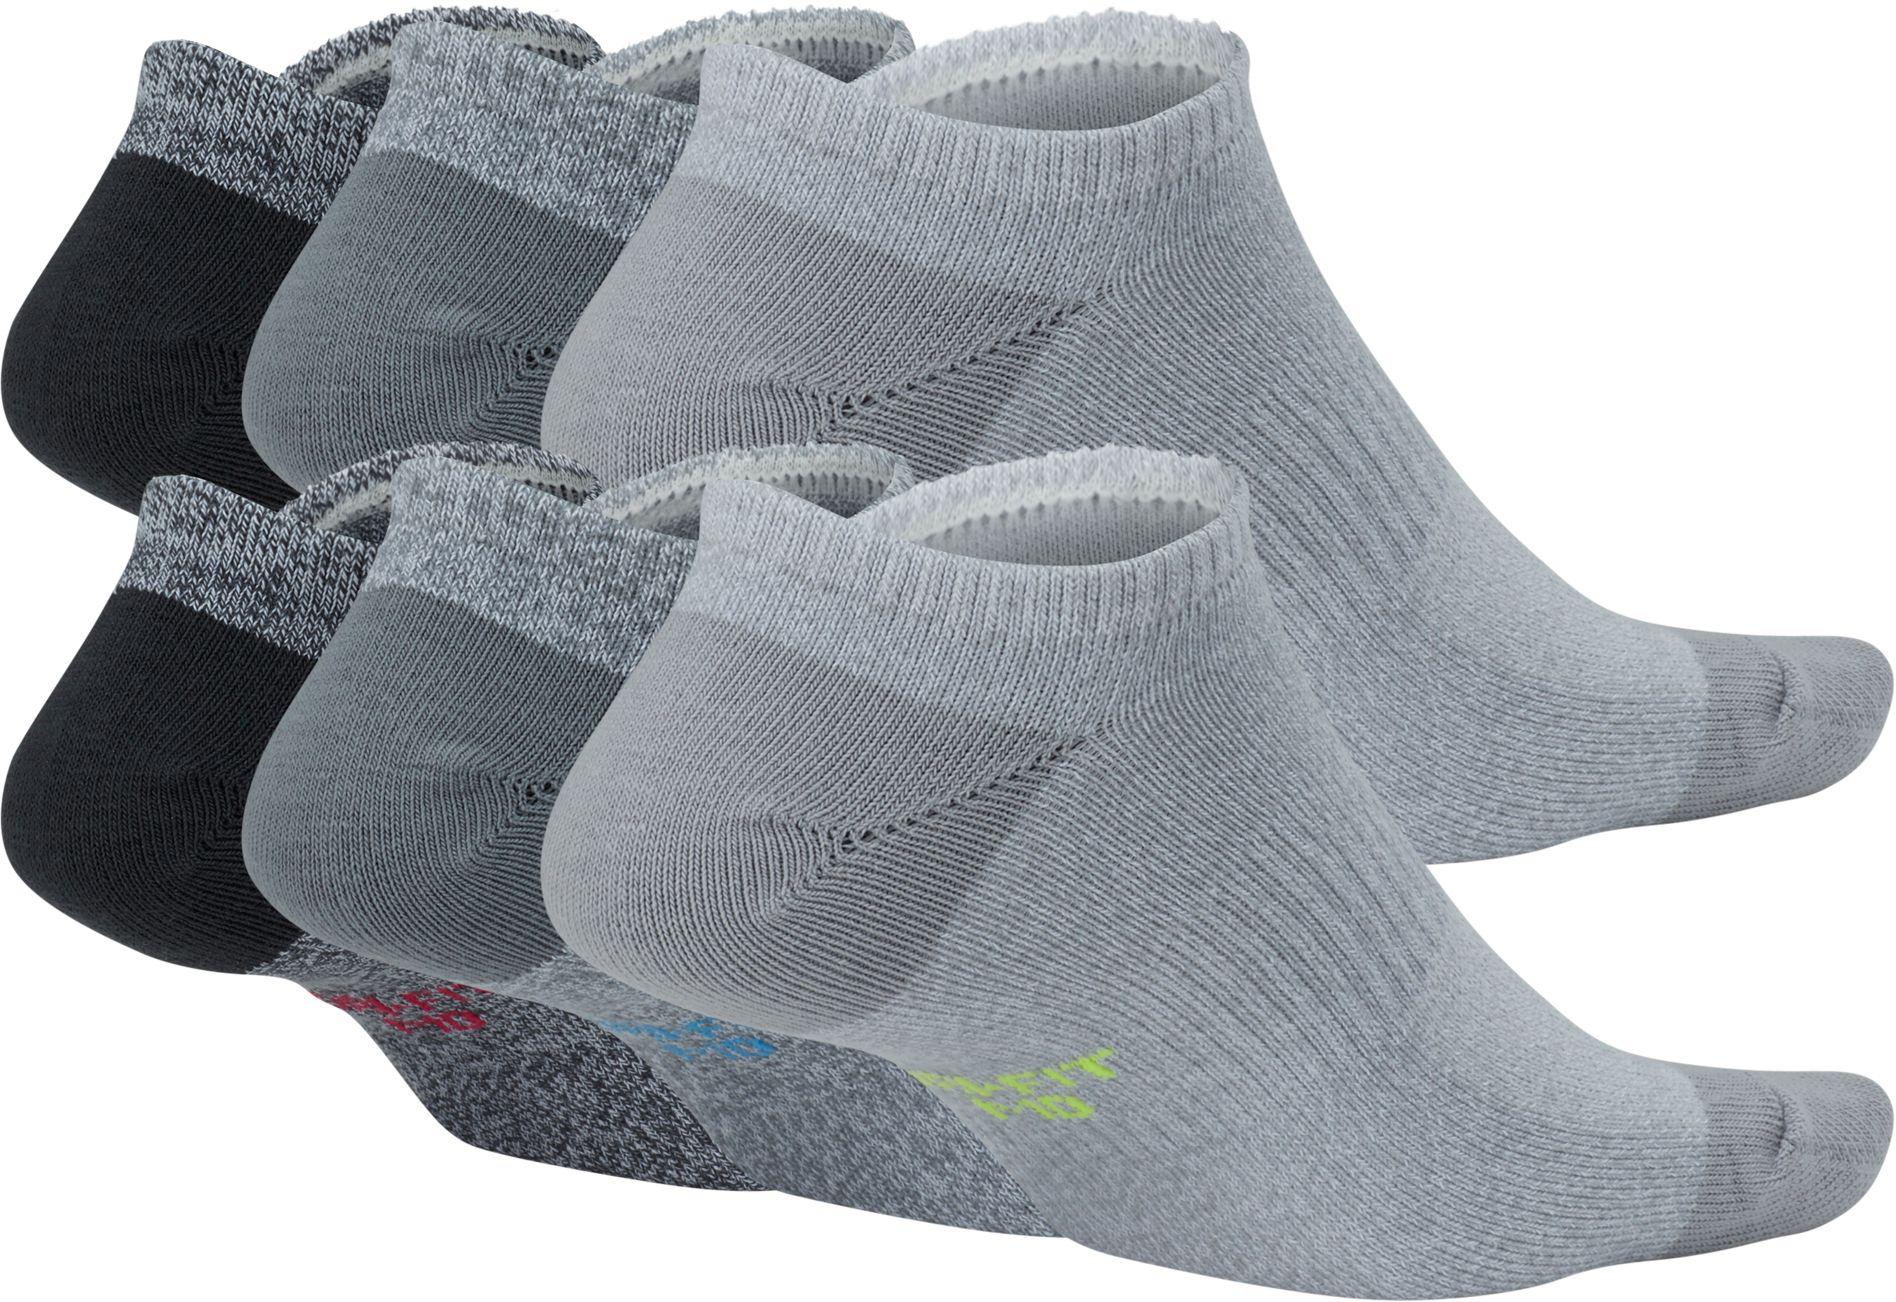 Nike Synthetic 6pk Lightweight No Show Socks in Grey (Gray) - Lyst